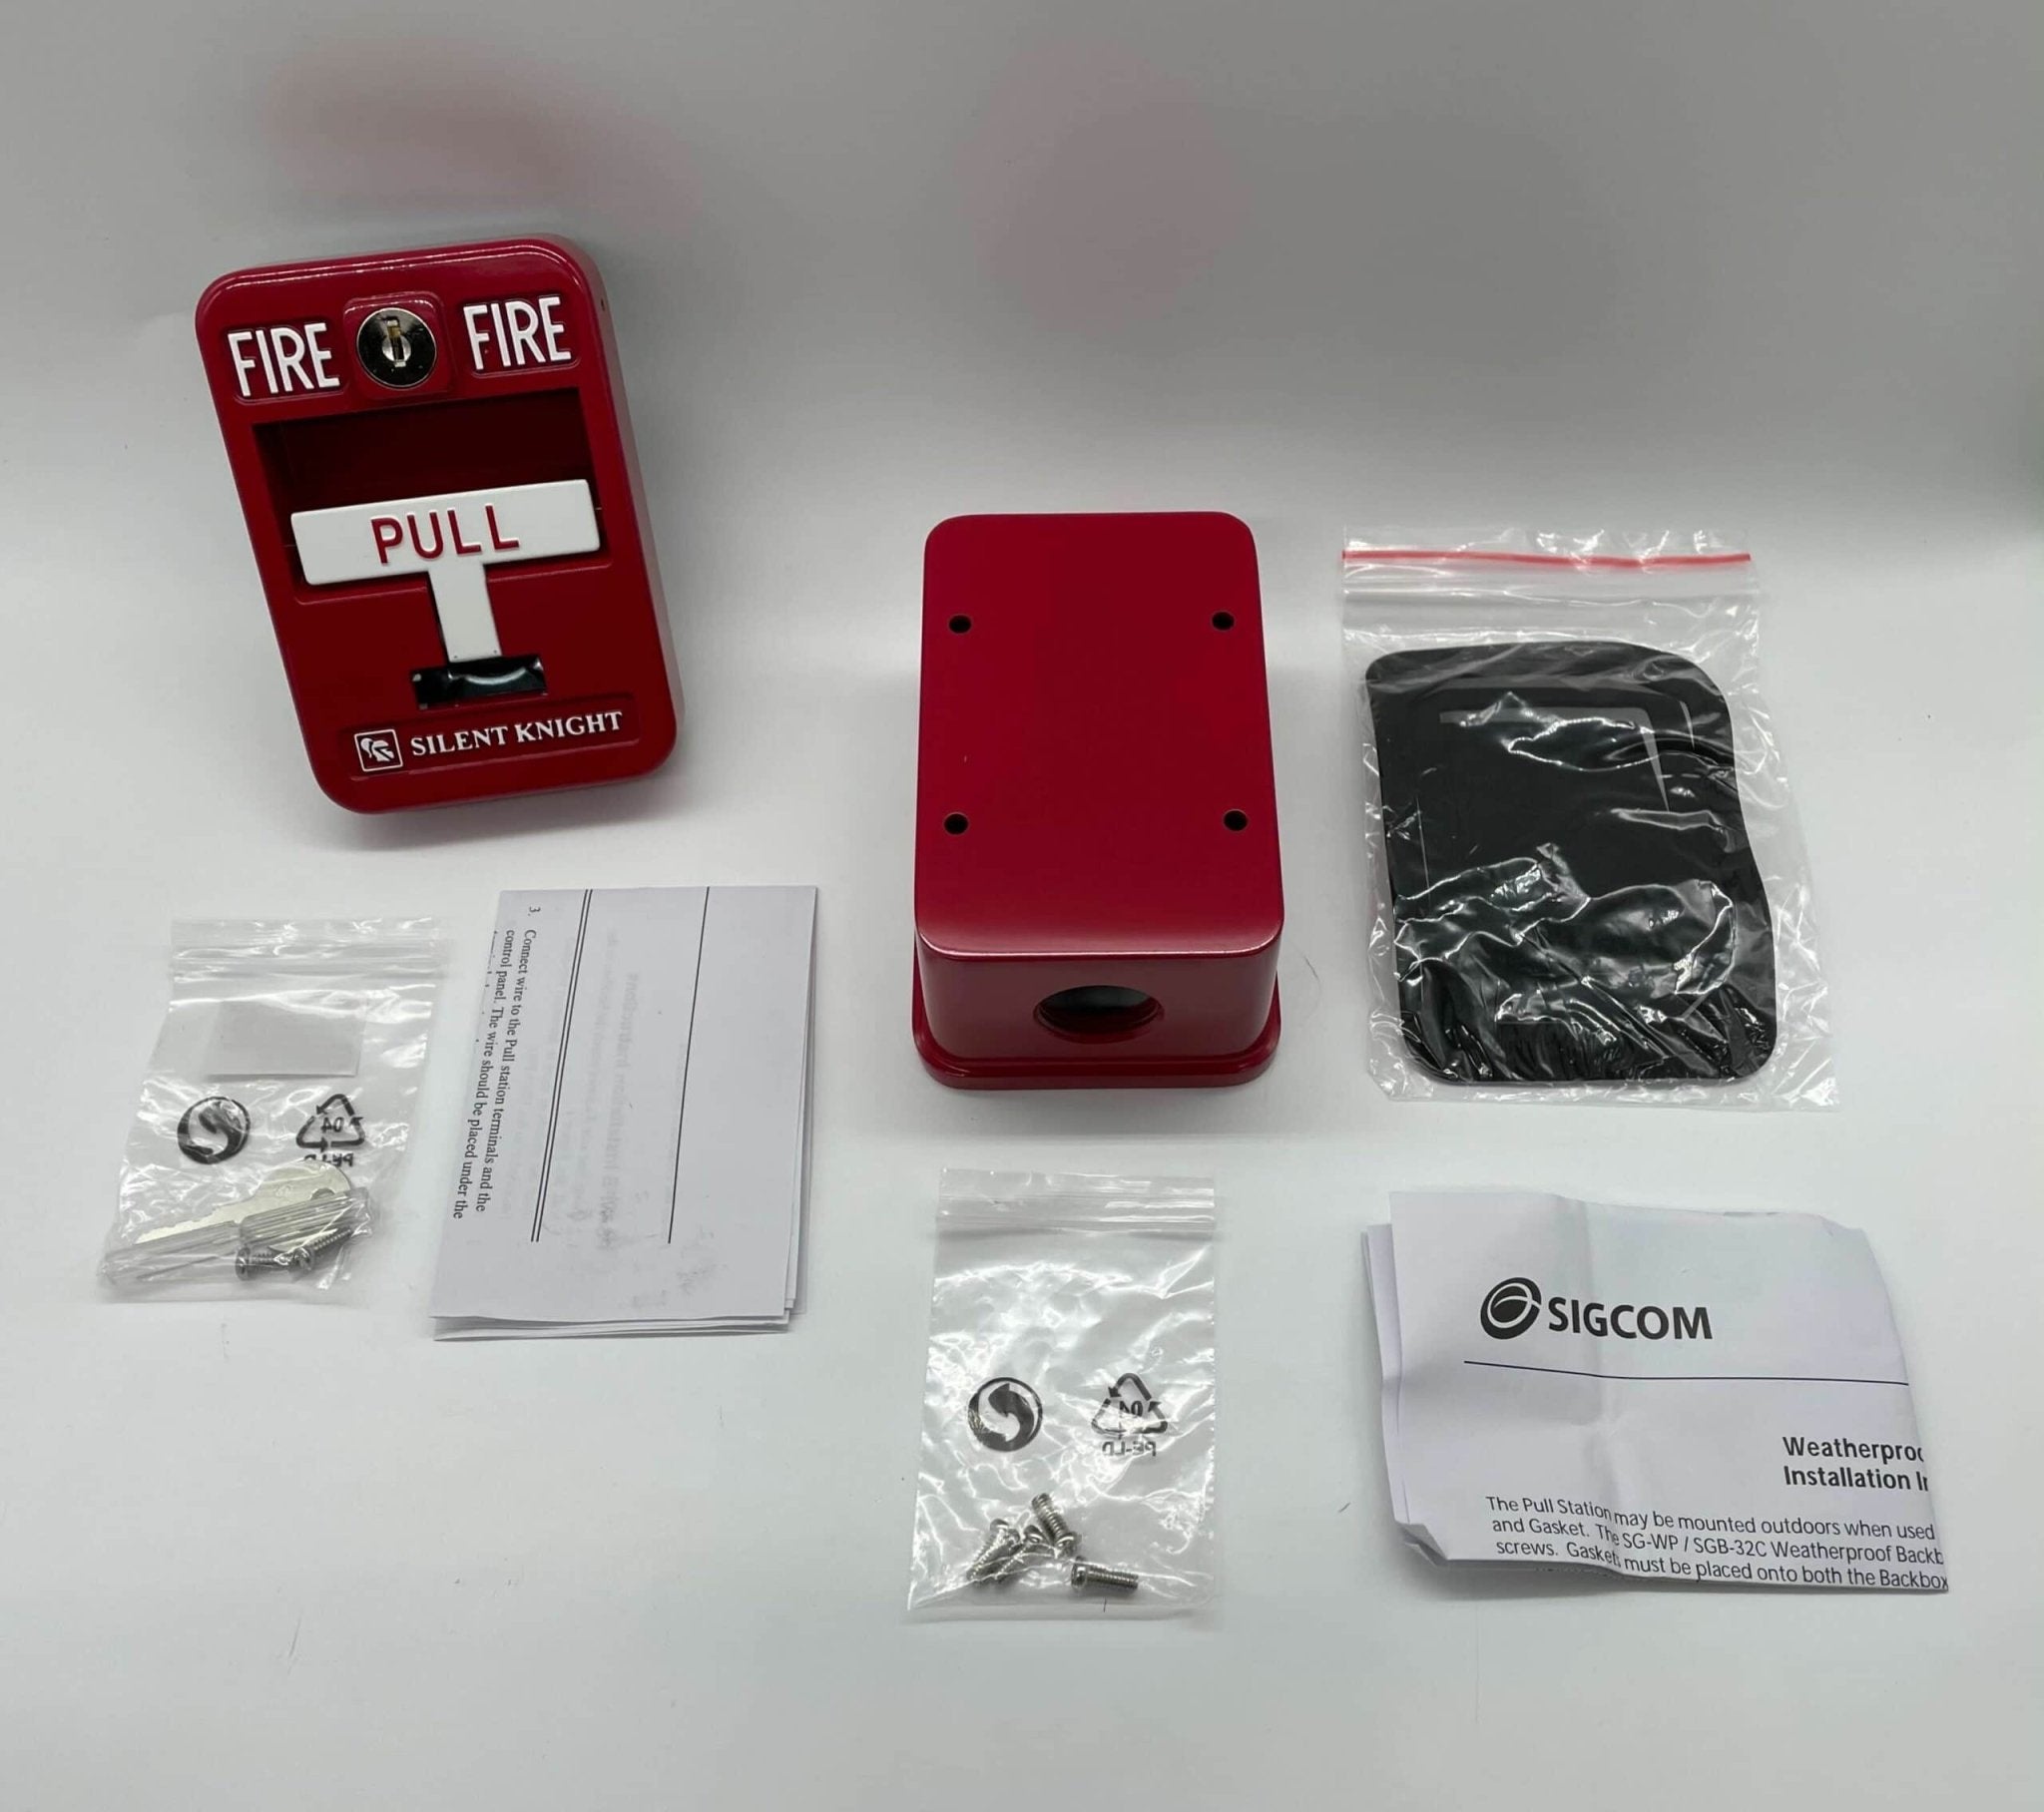 Silent Knight PS-SATK-WP Outdoor Pull Station - The Fire Alarm Supplier